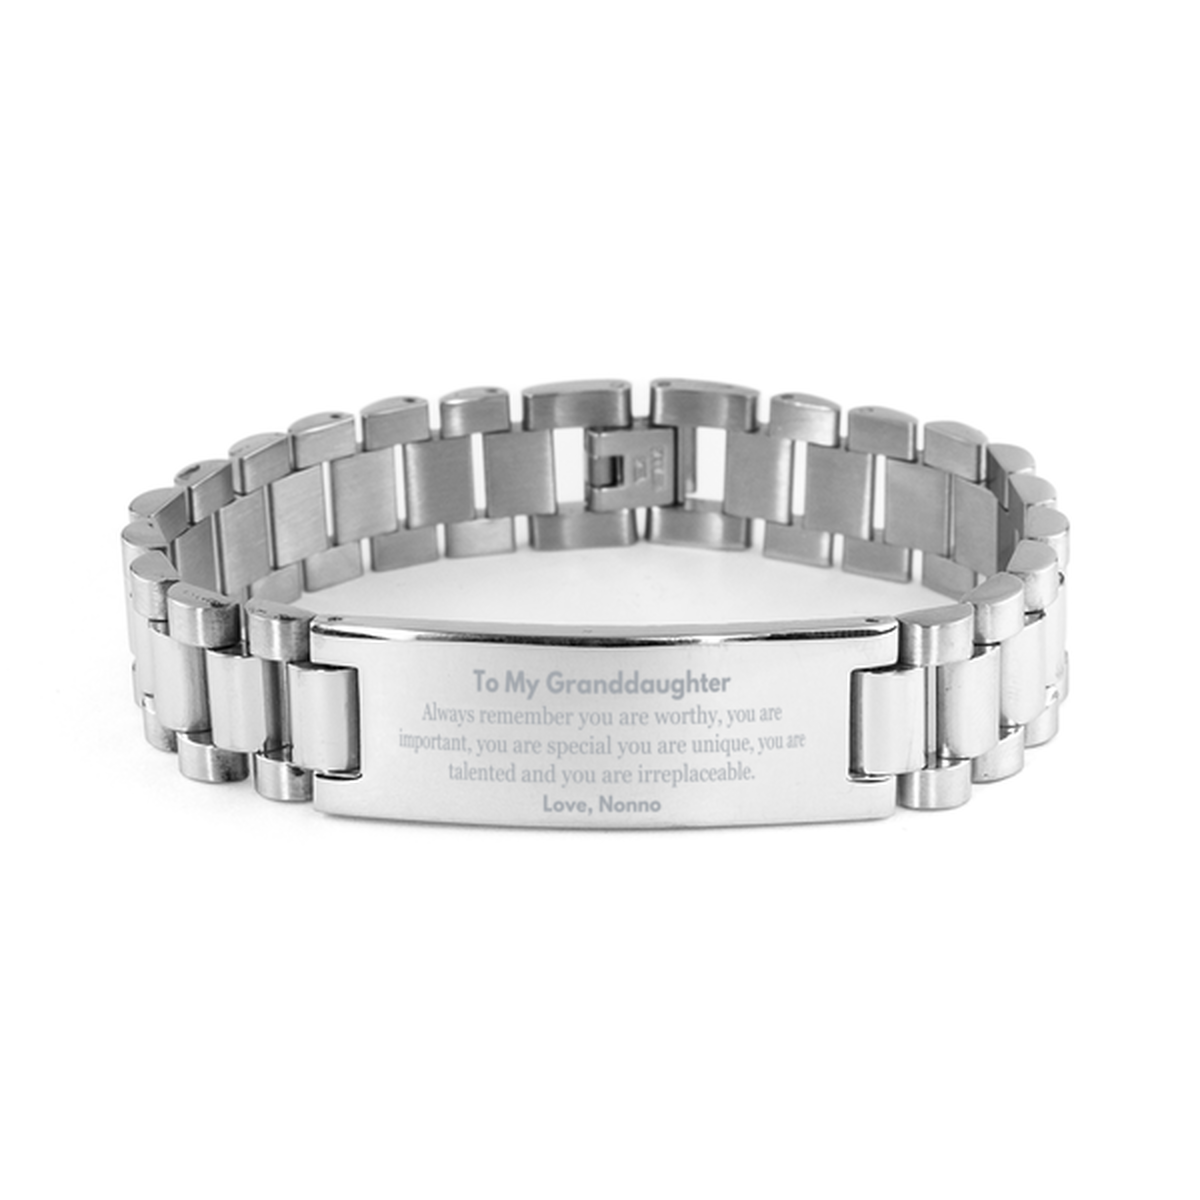 Granddaughter Birthday Gifts from Nonno, Inspirational Ladder Stainless Steel Bracelet for Granddaughter Christmas Graduation Gifts for Granddaughter Always remember you are worthy, you are important. Love, Nonno